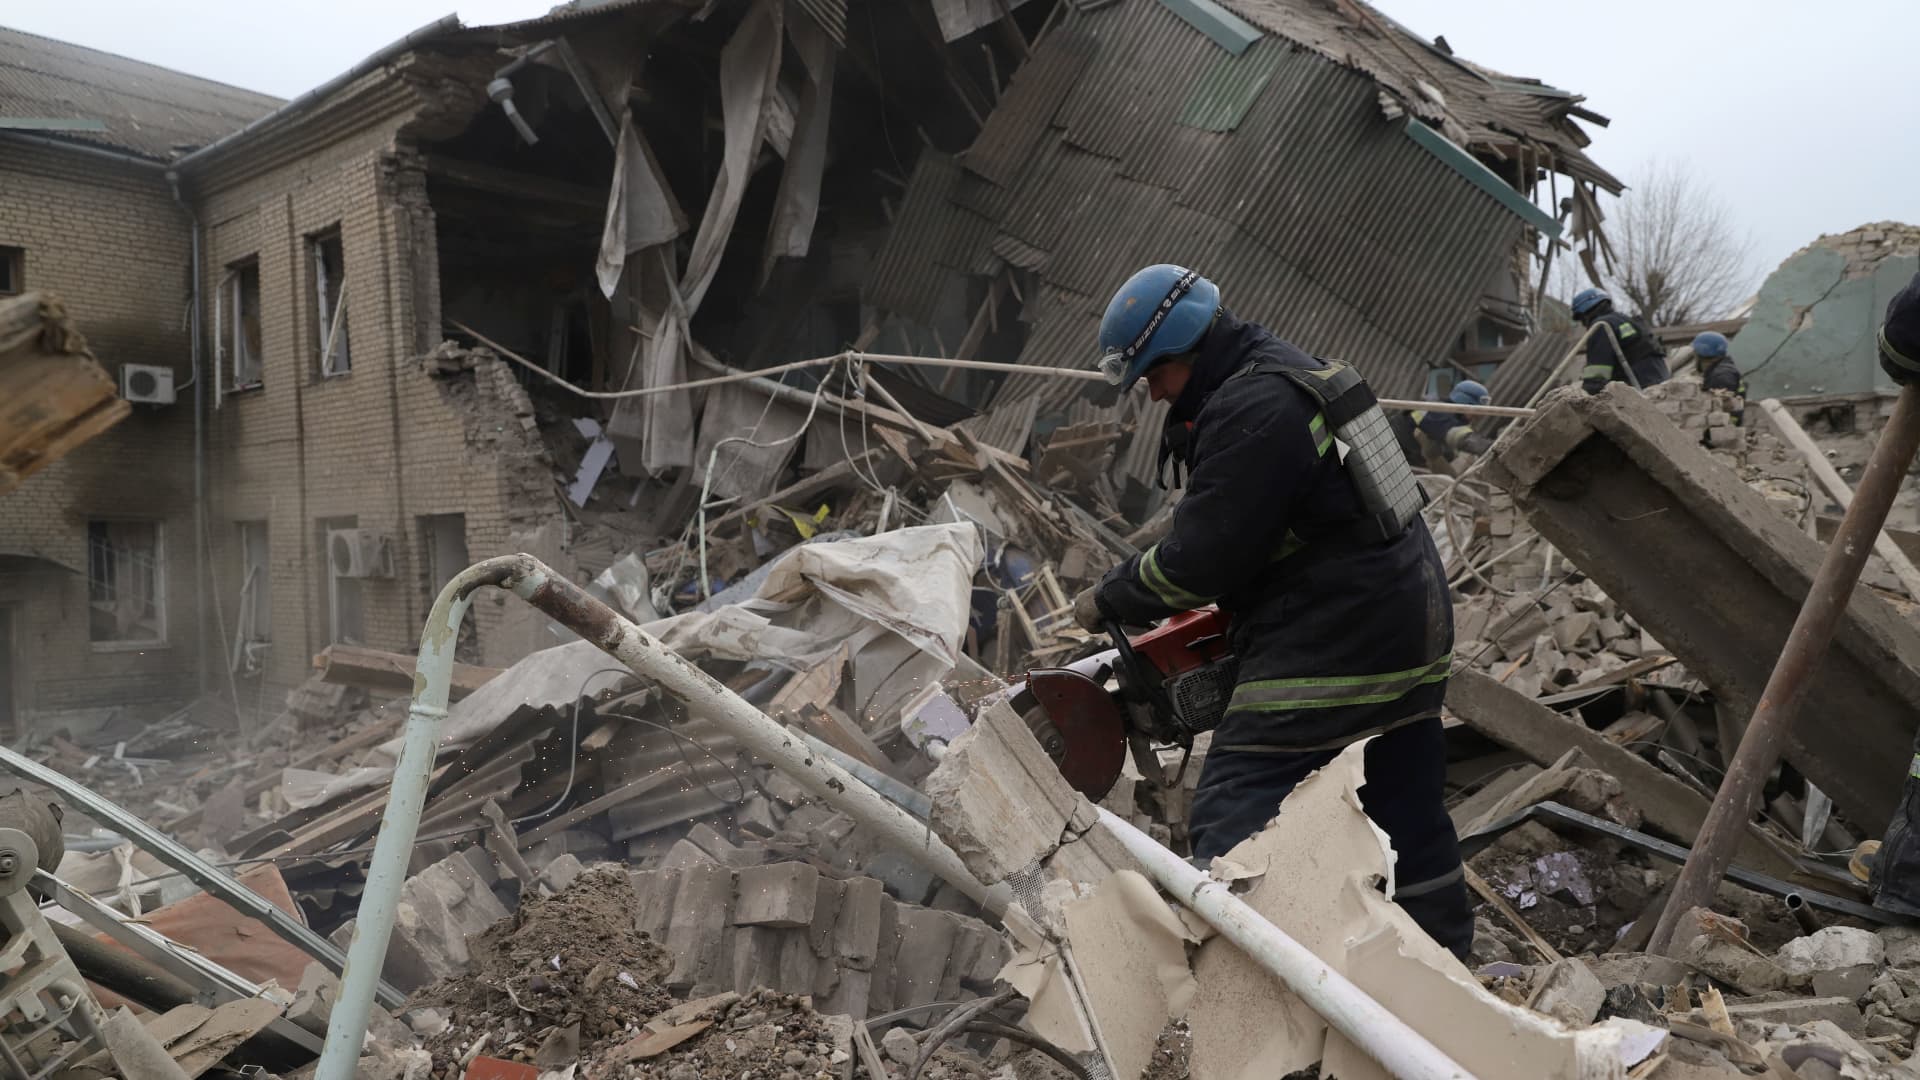 Rescuers clear debris of the destroyed two-storey maternity building in the town of Vilnyansk, southern Zaporizhzhia region, on November 23, 2022, amid the Russian invasion of Ukraine.